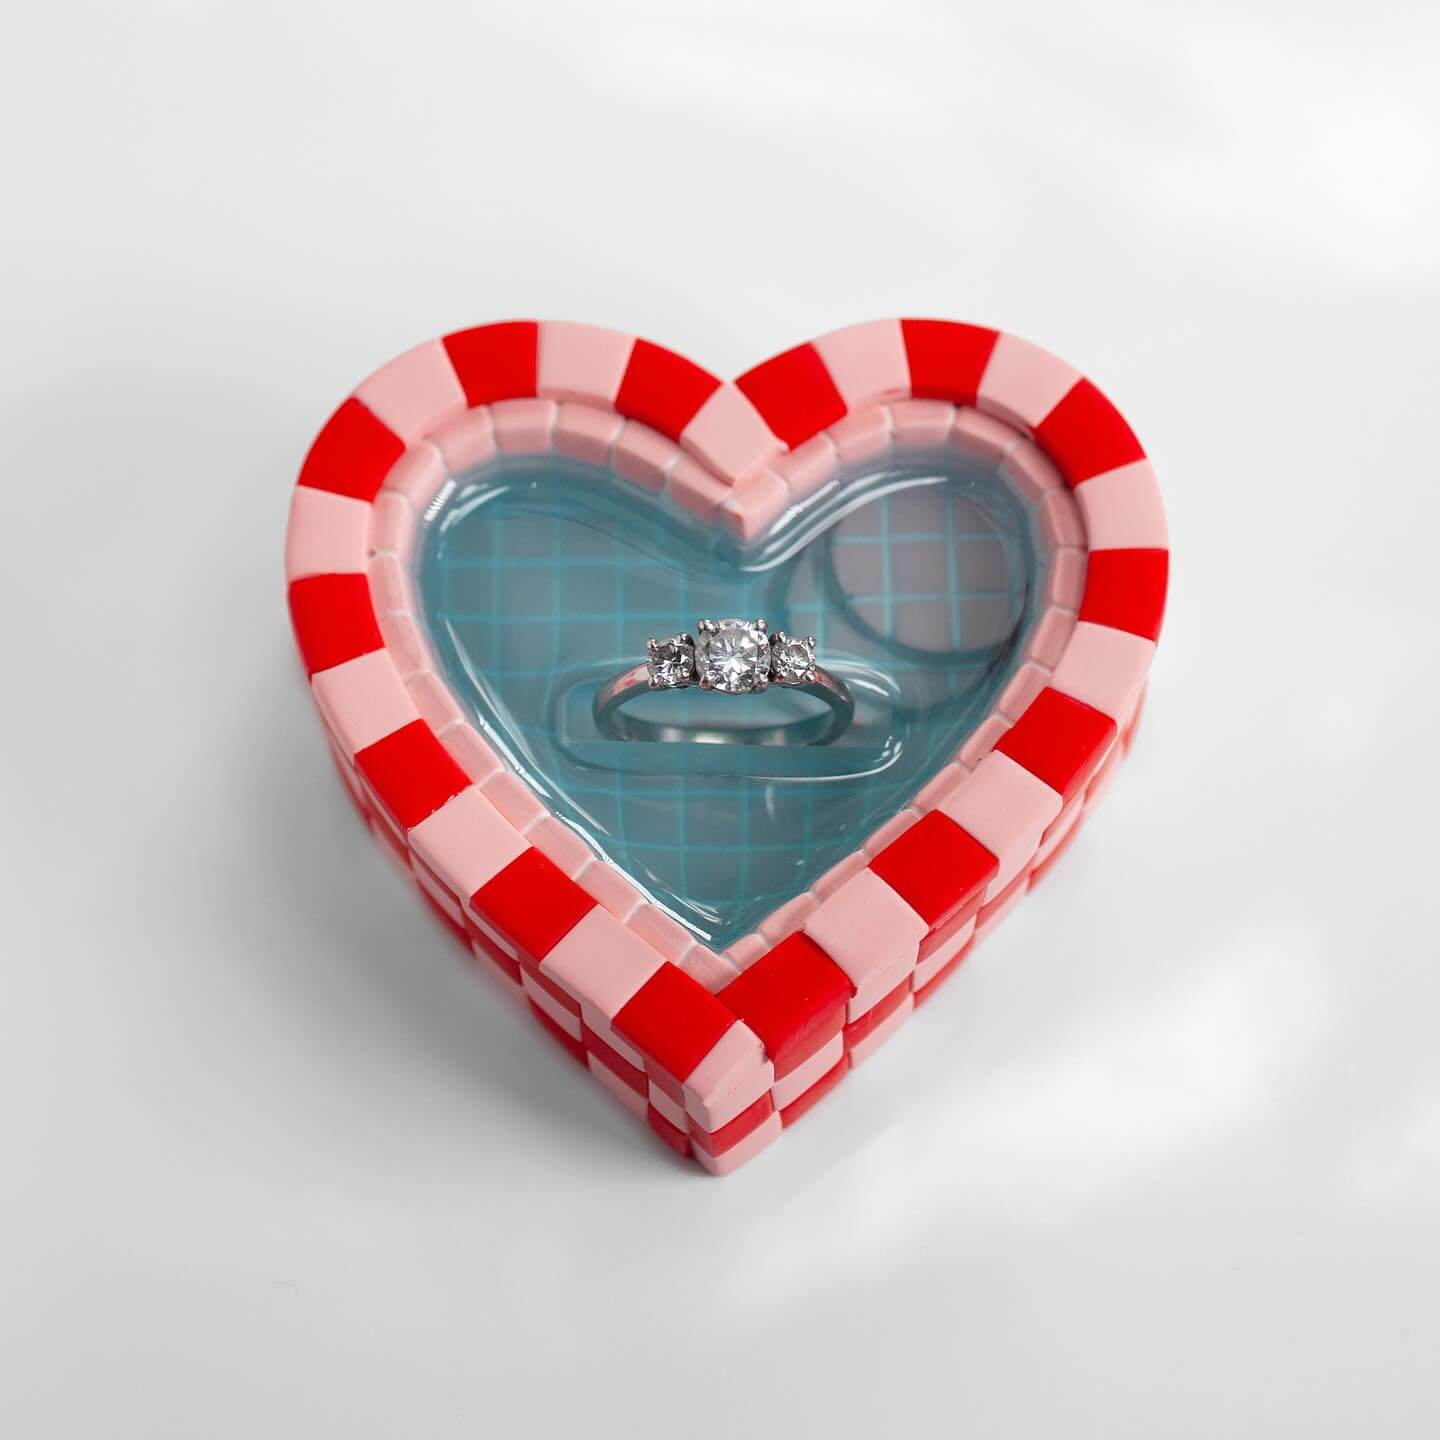 heart shaped pool ring holder by shistine